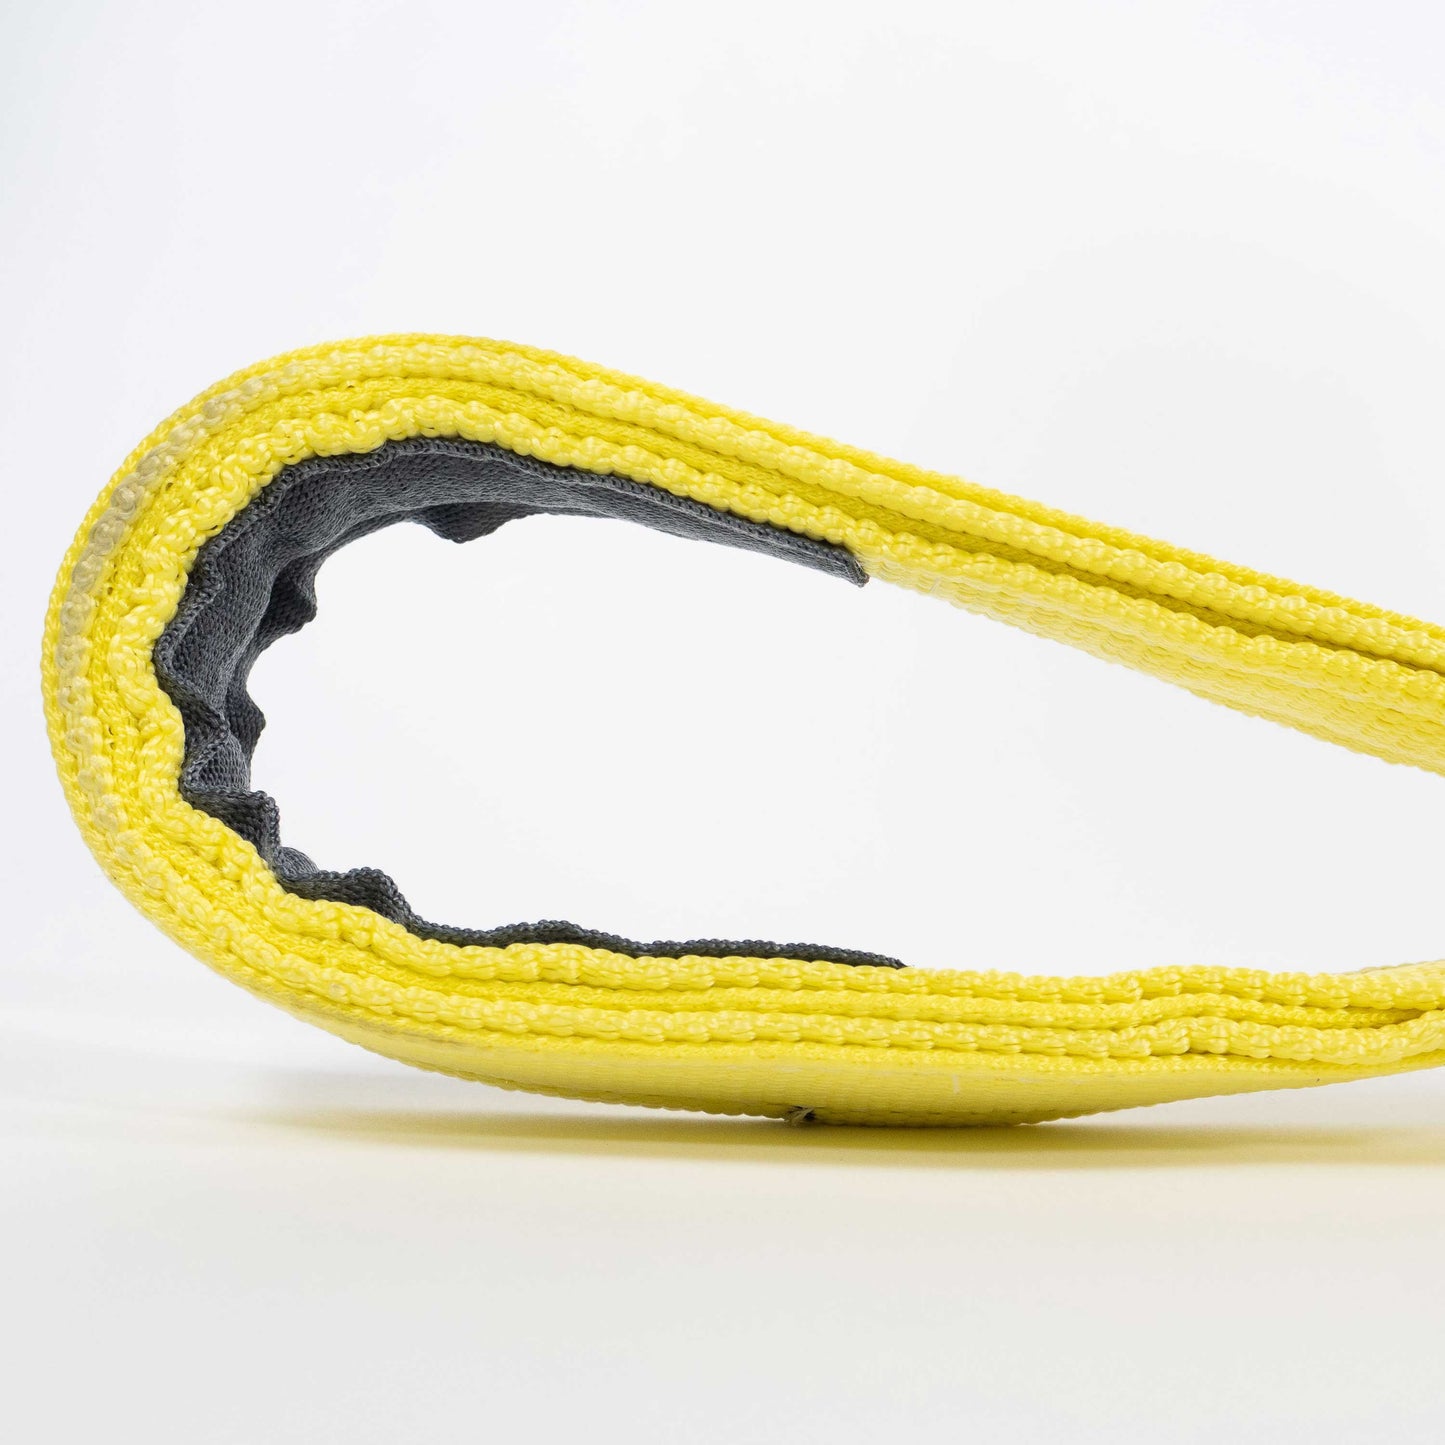 4" x 20' Heavy Duty Recovery Strap with Reinforced Cordura Eyes - 3 Ply | 38,250 WLL